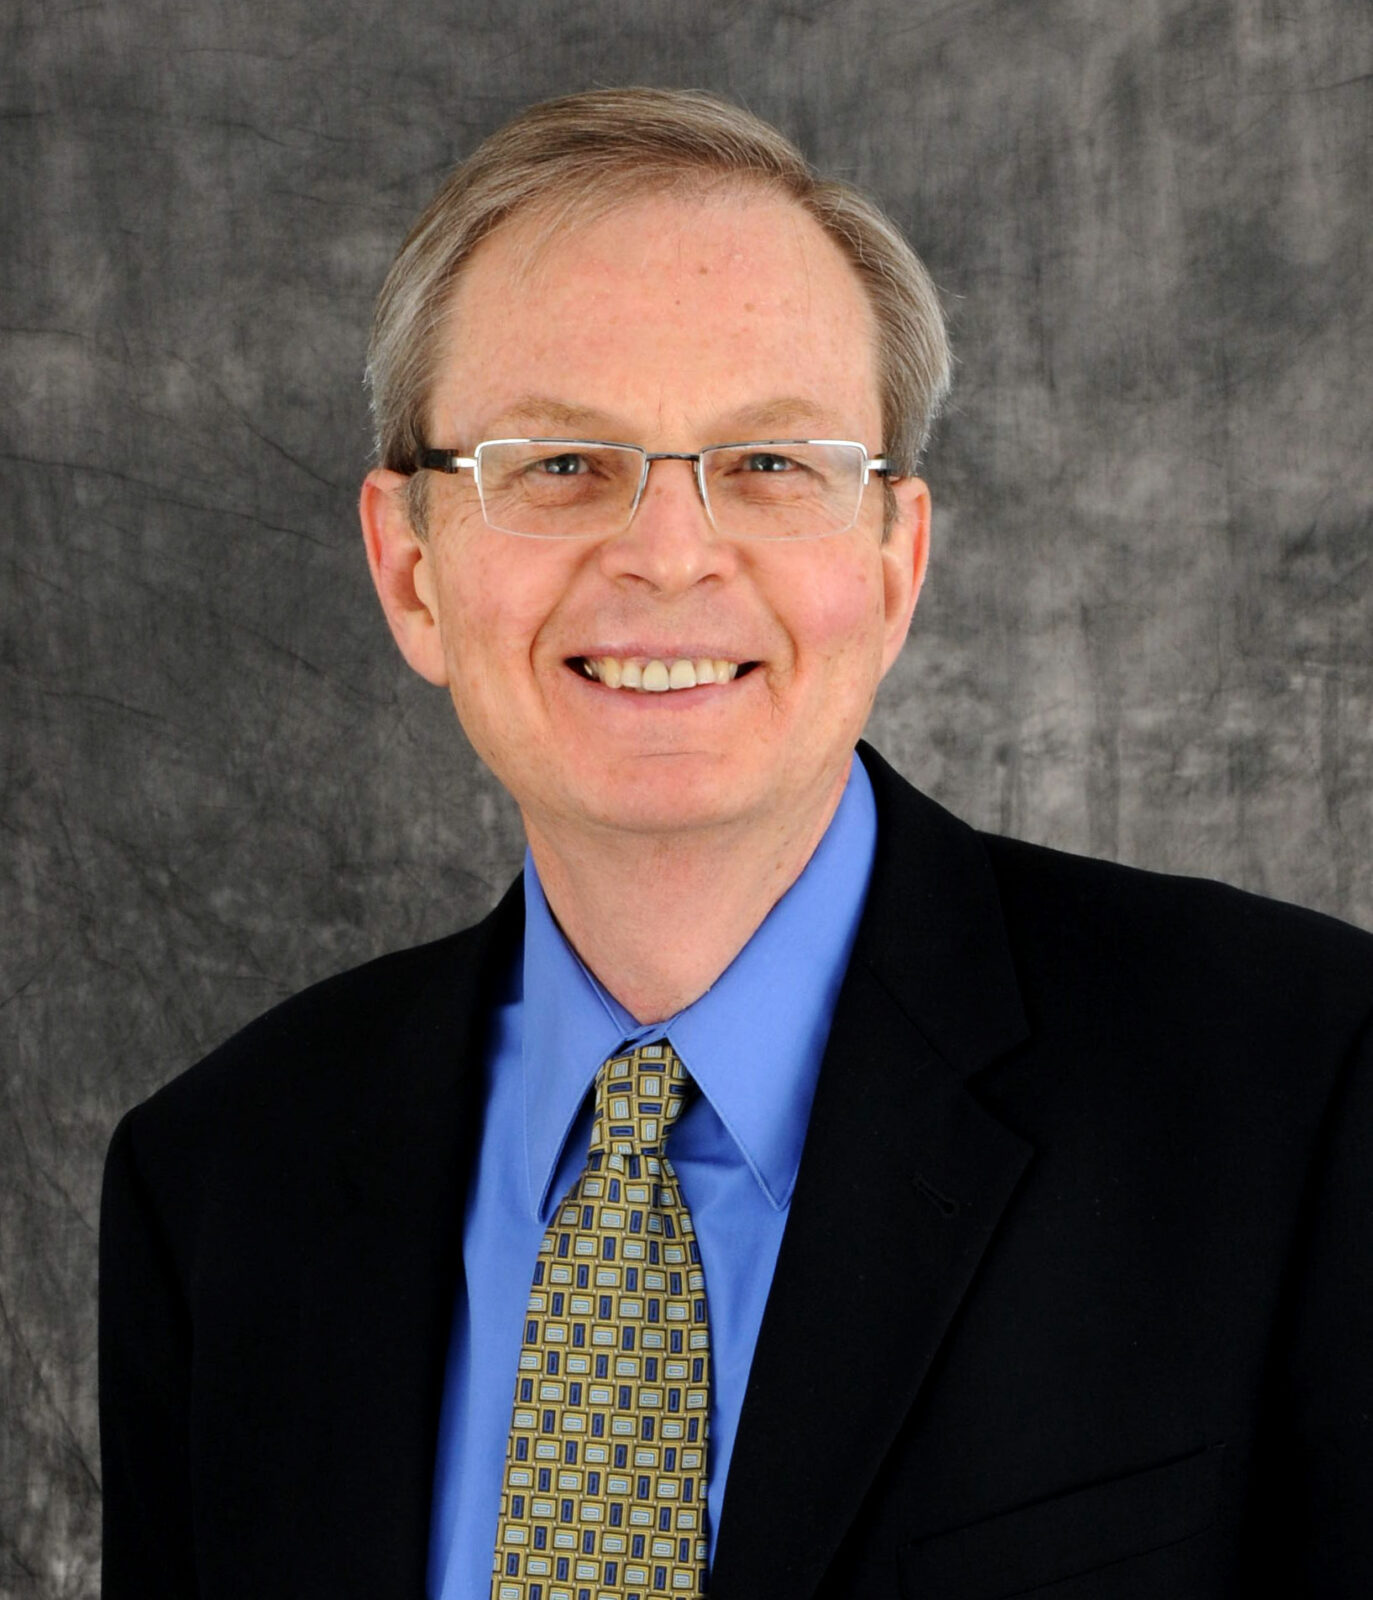 Dr. Jay A. Switzer, Donald L. Castleman/Foundation for Chemical Research Professor of Discovery